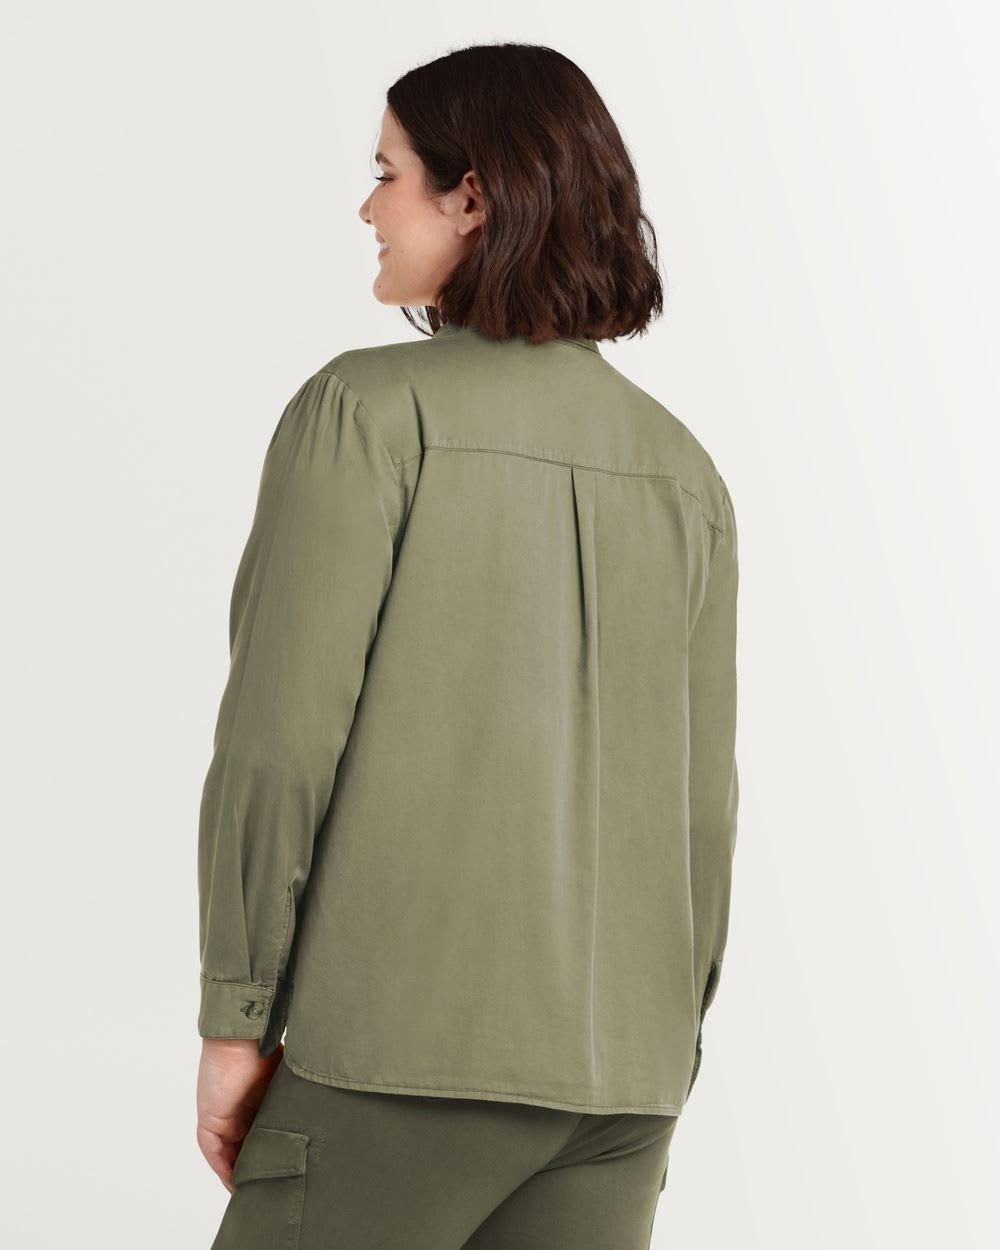 Cotton Twill Shirt Jacket with Chest Pockets